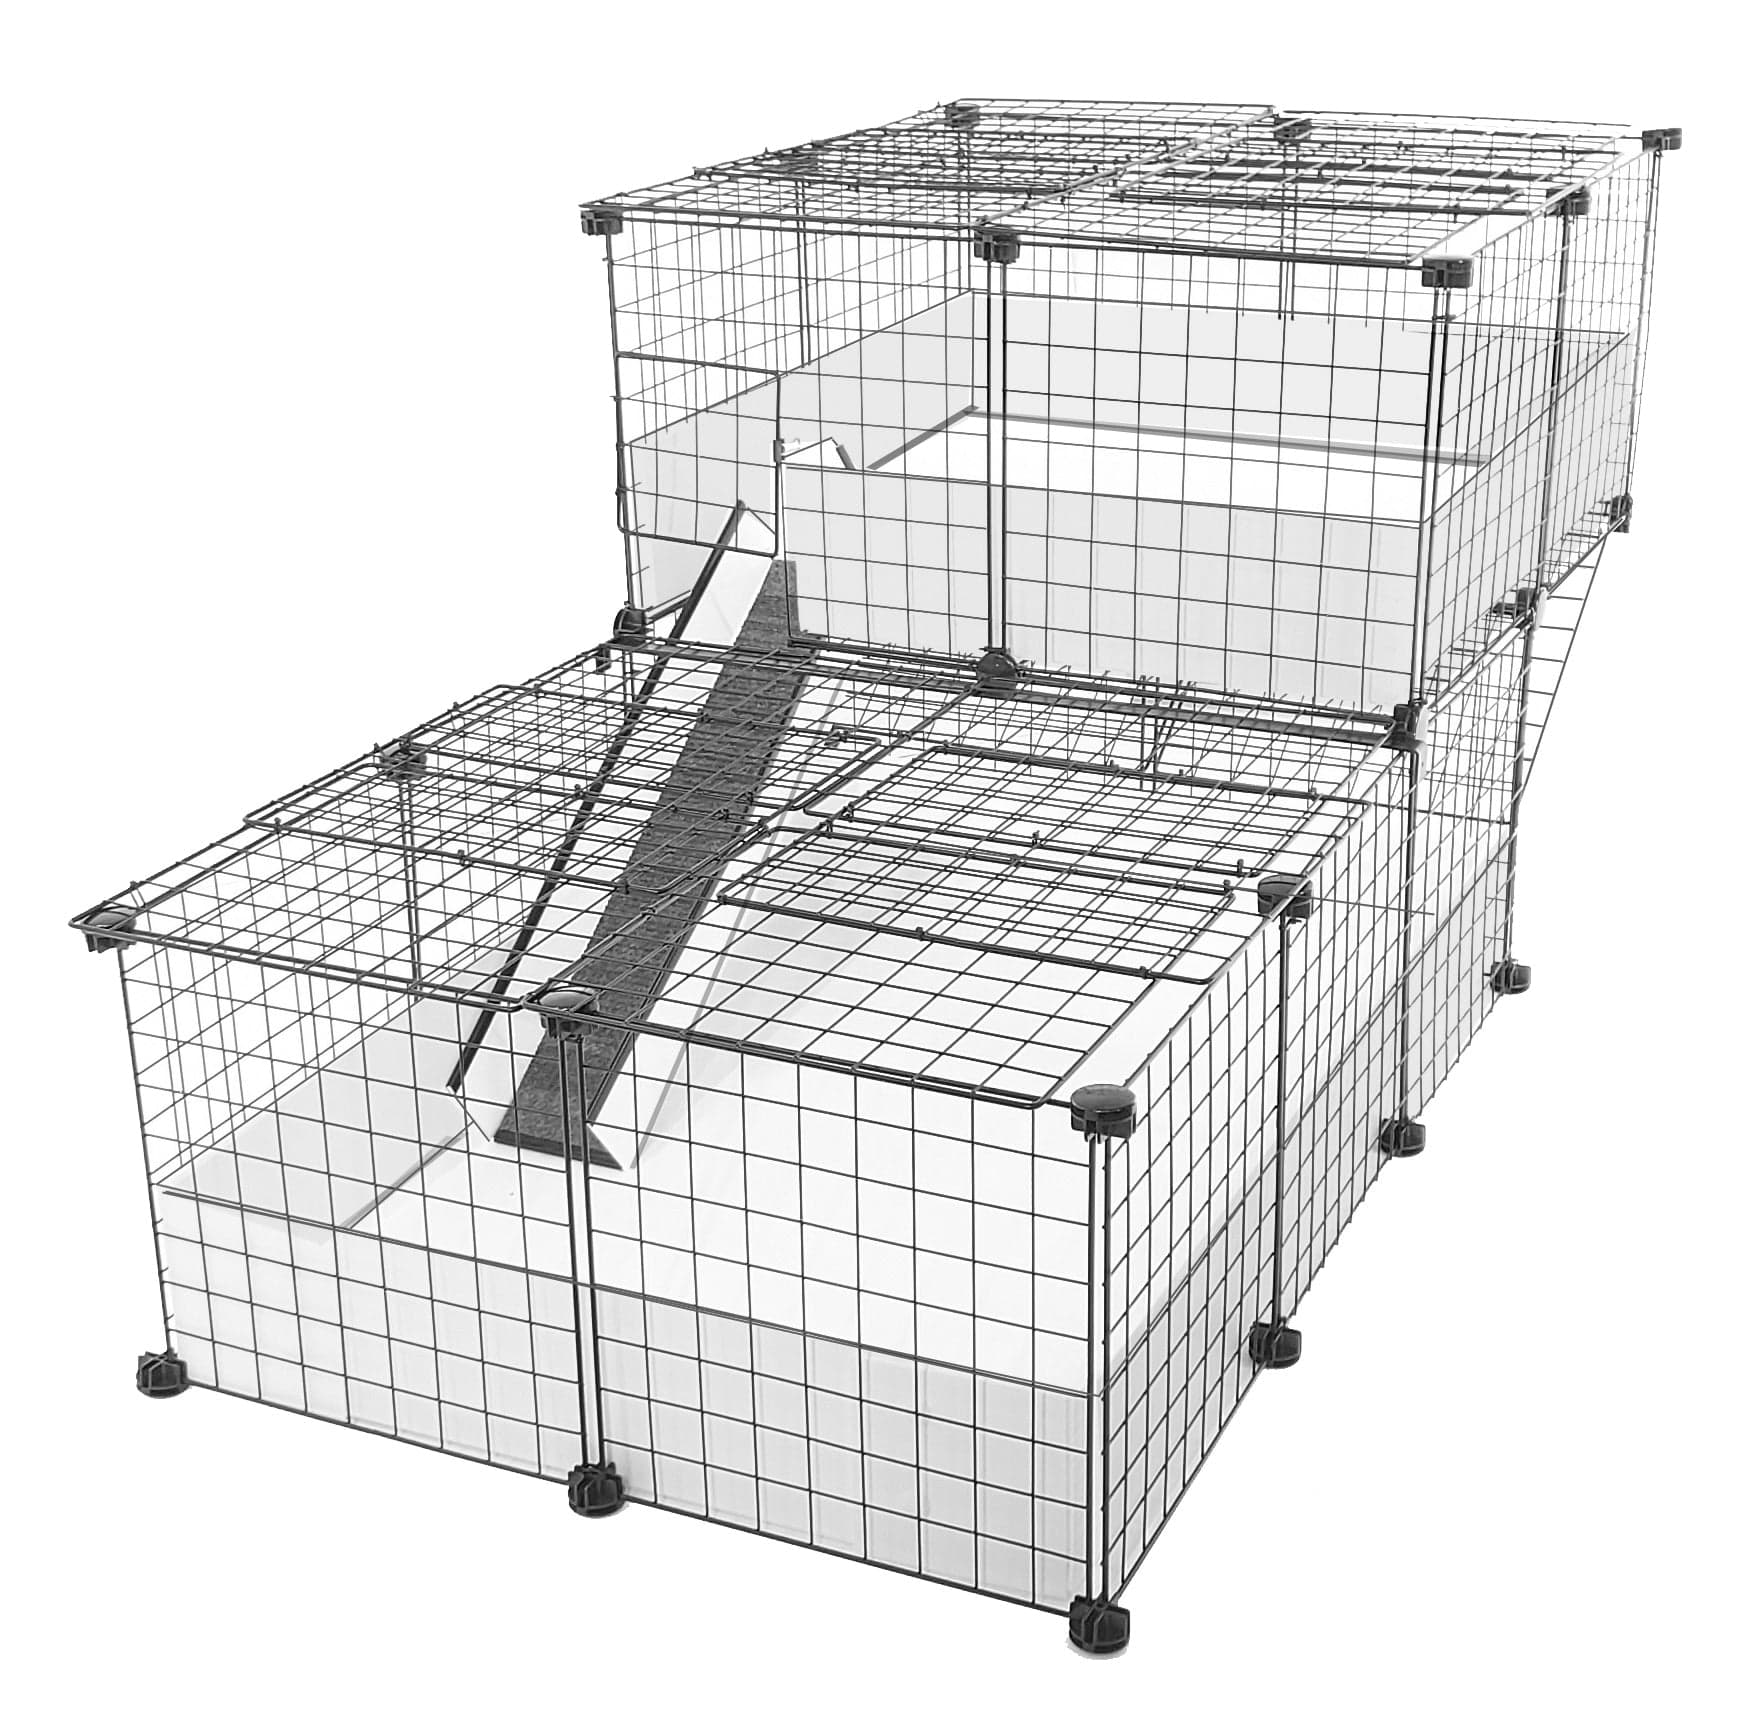 Covered white c&c guinea pig cage with an offset wide loft and black grids